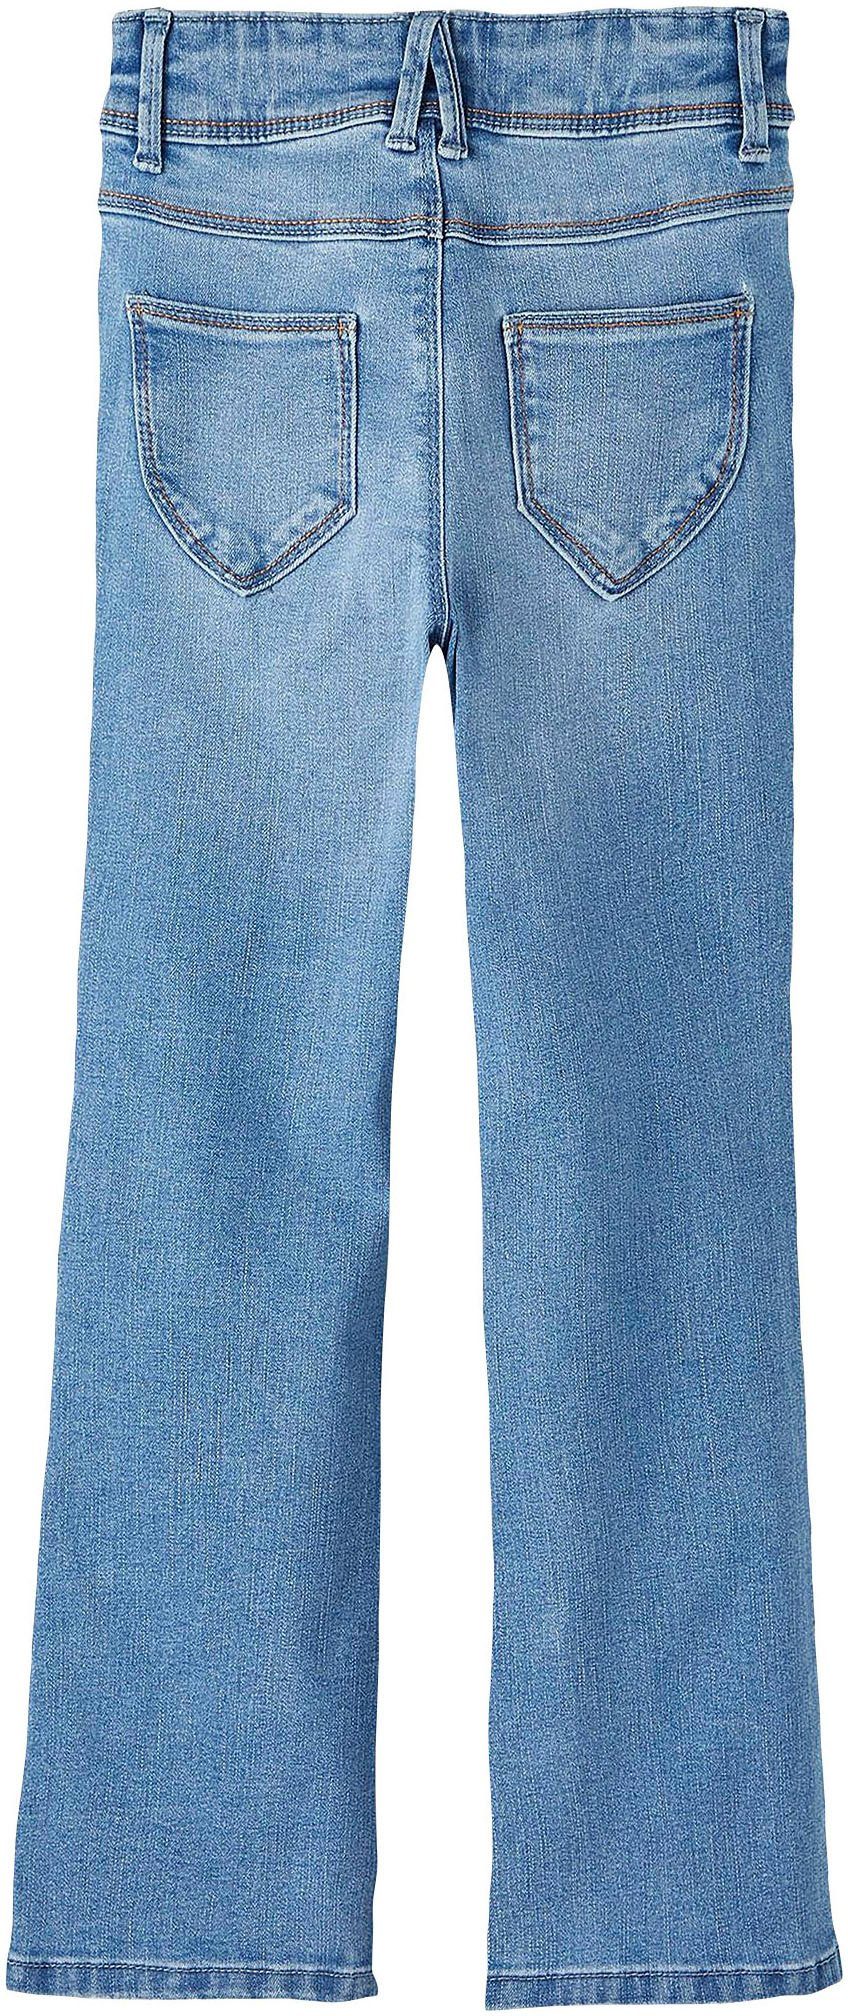 Name It Bootcut-Jeans NKFPOLLY SKINNY blue 1142-AU NOOS mit Stretch BOOT JEANS medium